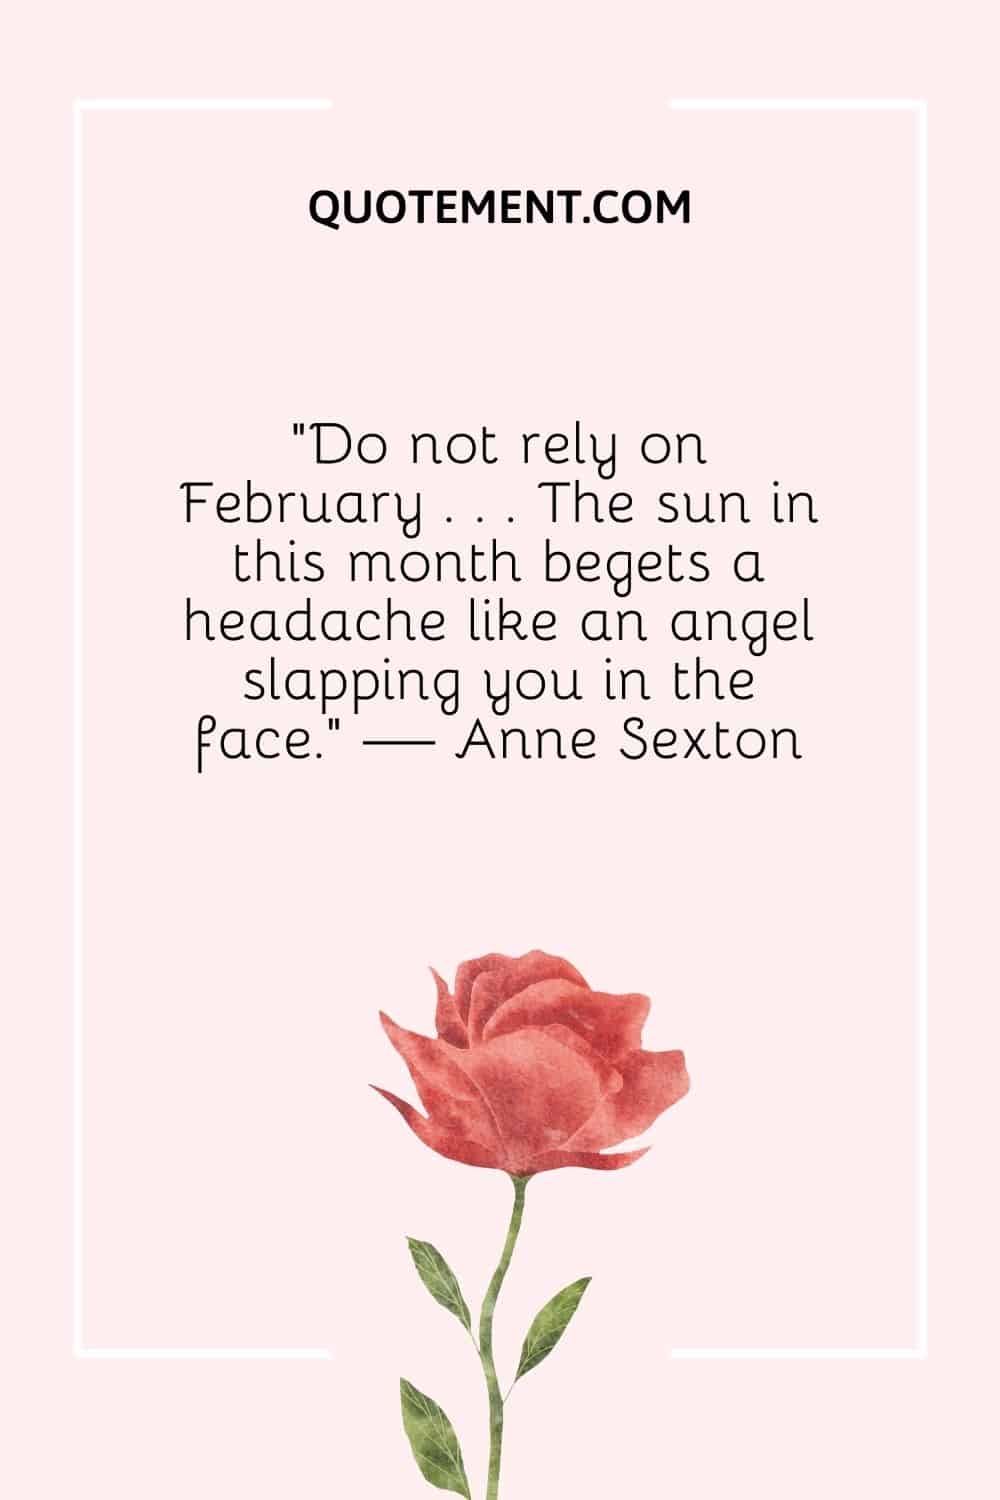 “Do not rely on February . . . The sun in this month begets a headache like an angel slapping you in the face.” — Anne Sexton